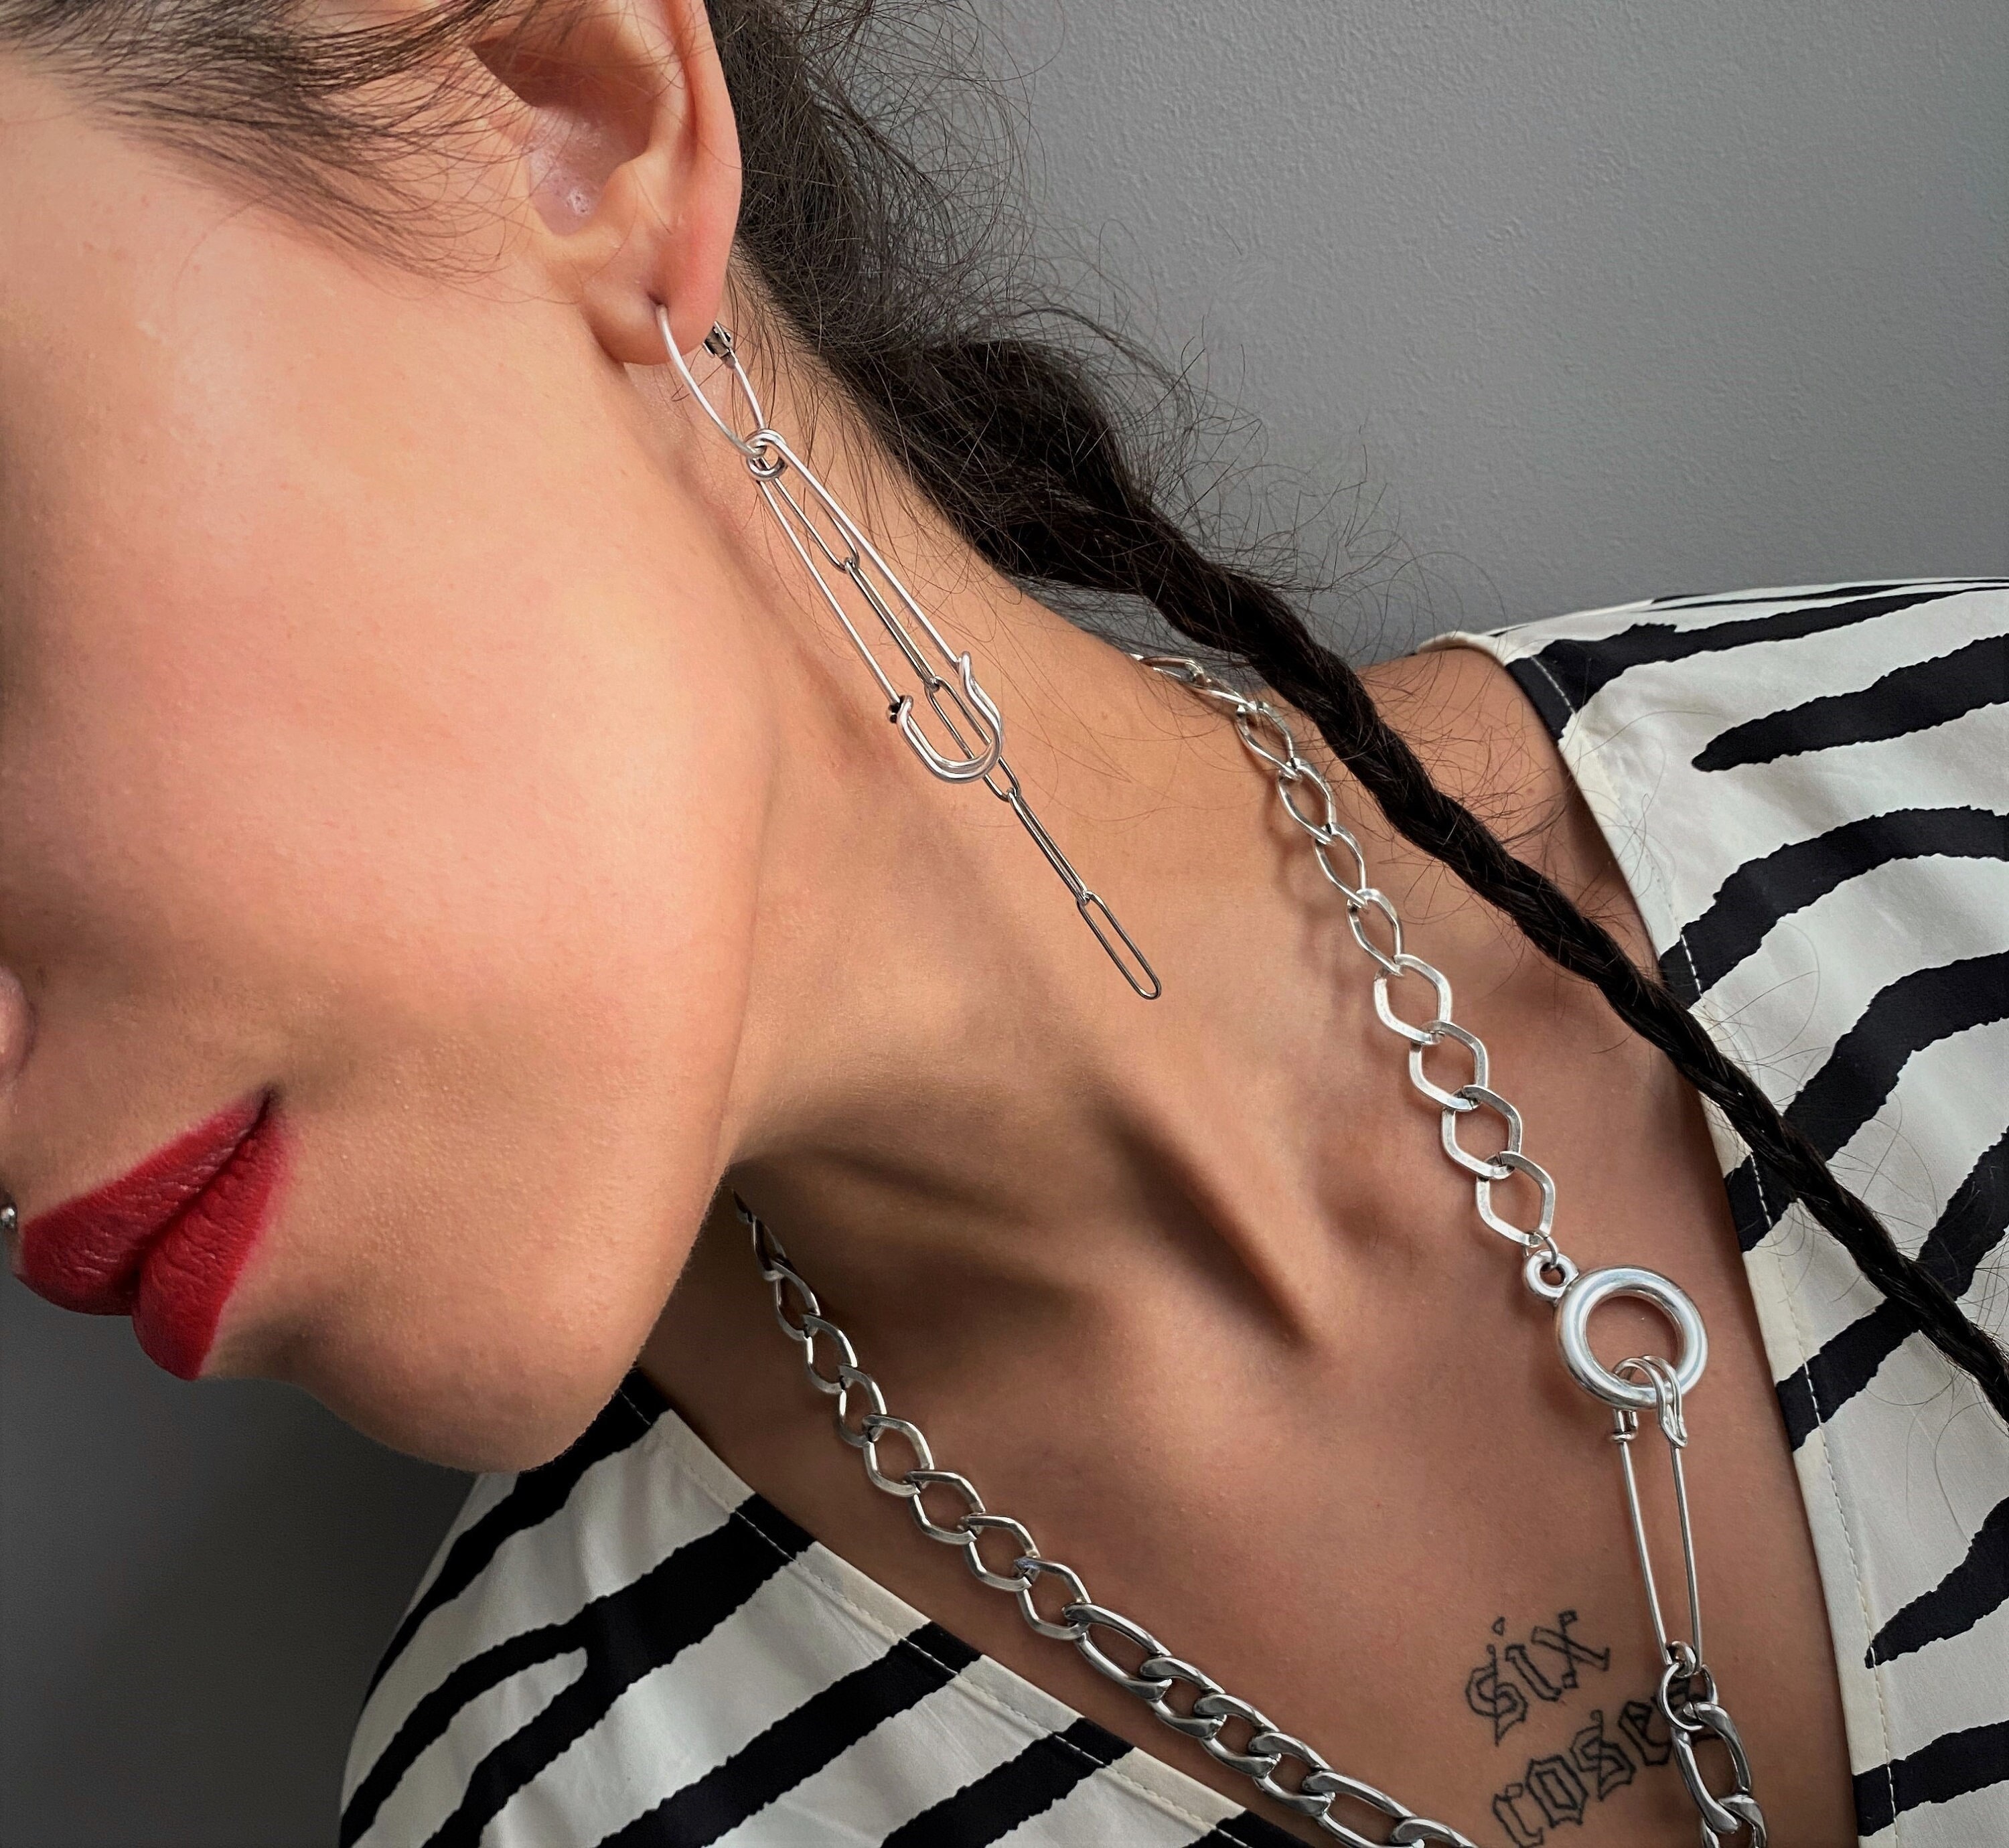 Edgy Safety Pin Earrings | Handmade Jewelry | She-bang Shop Mixed Chain